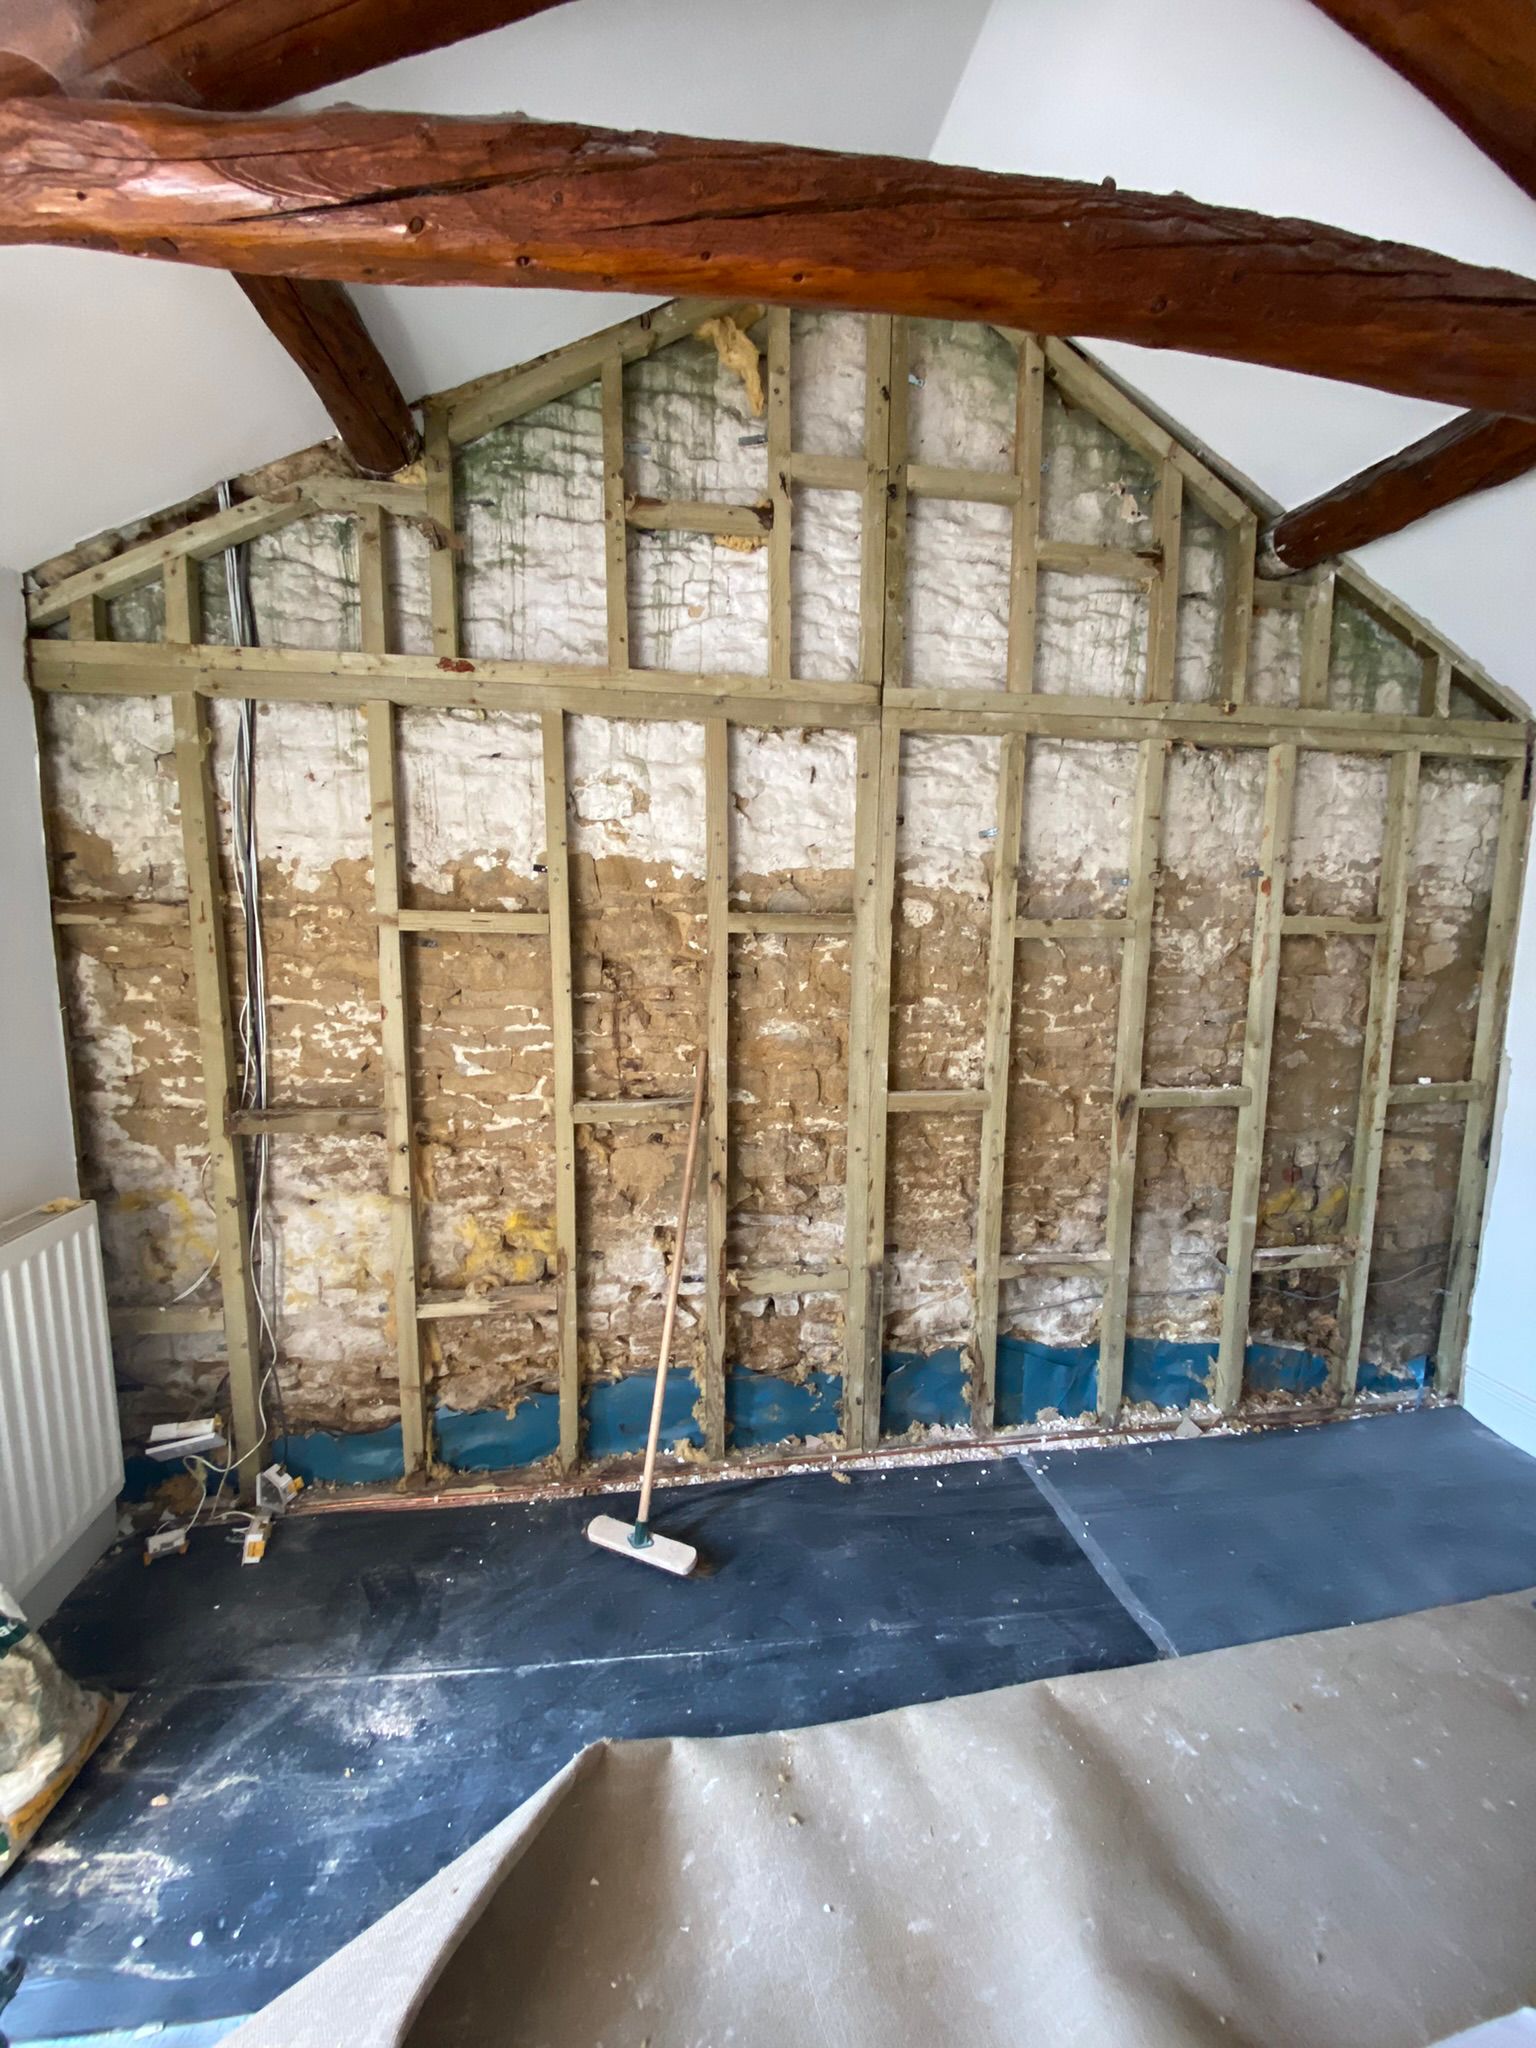 The stripped out gable end wall, showing damp timbers